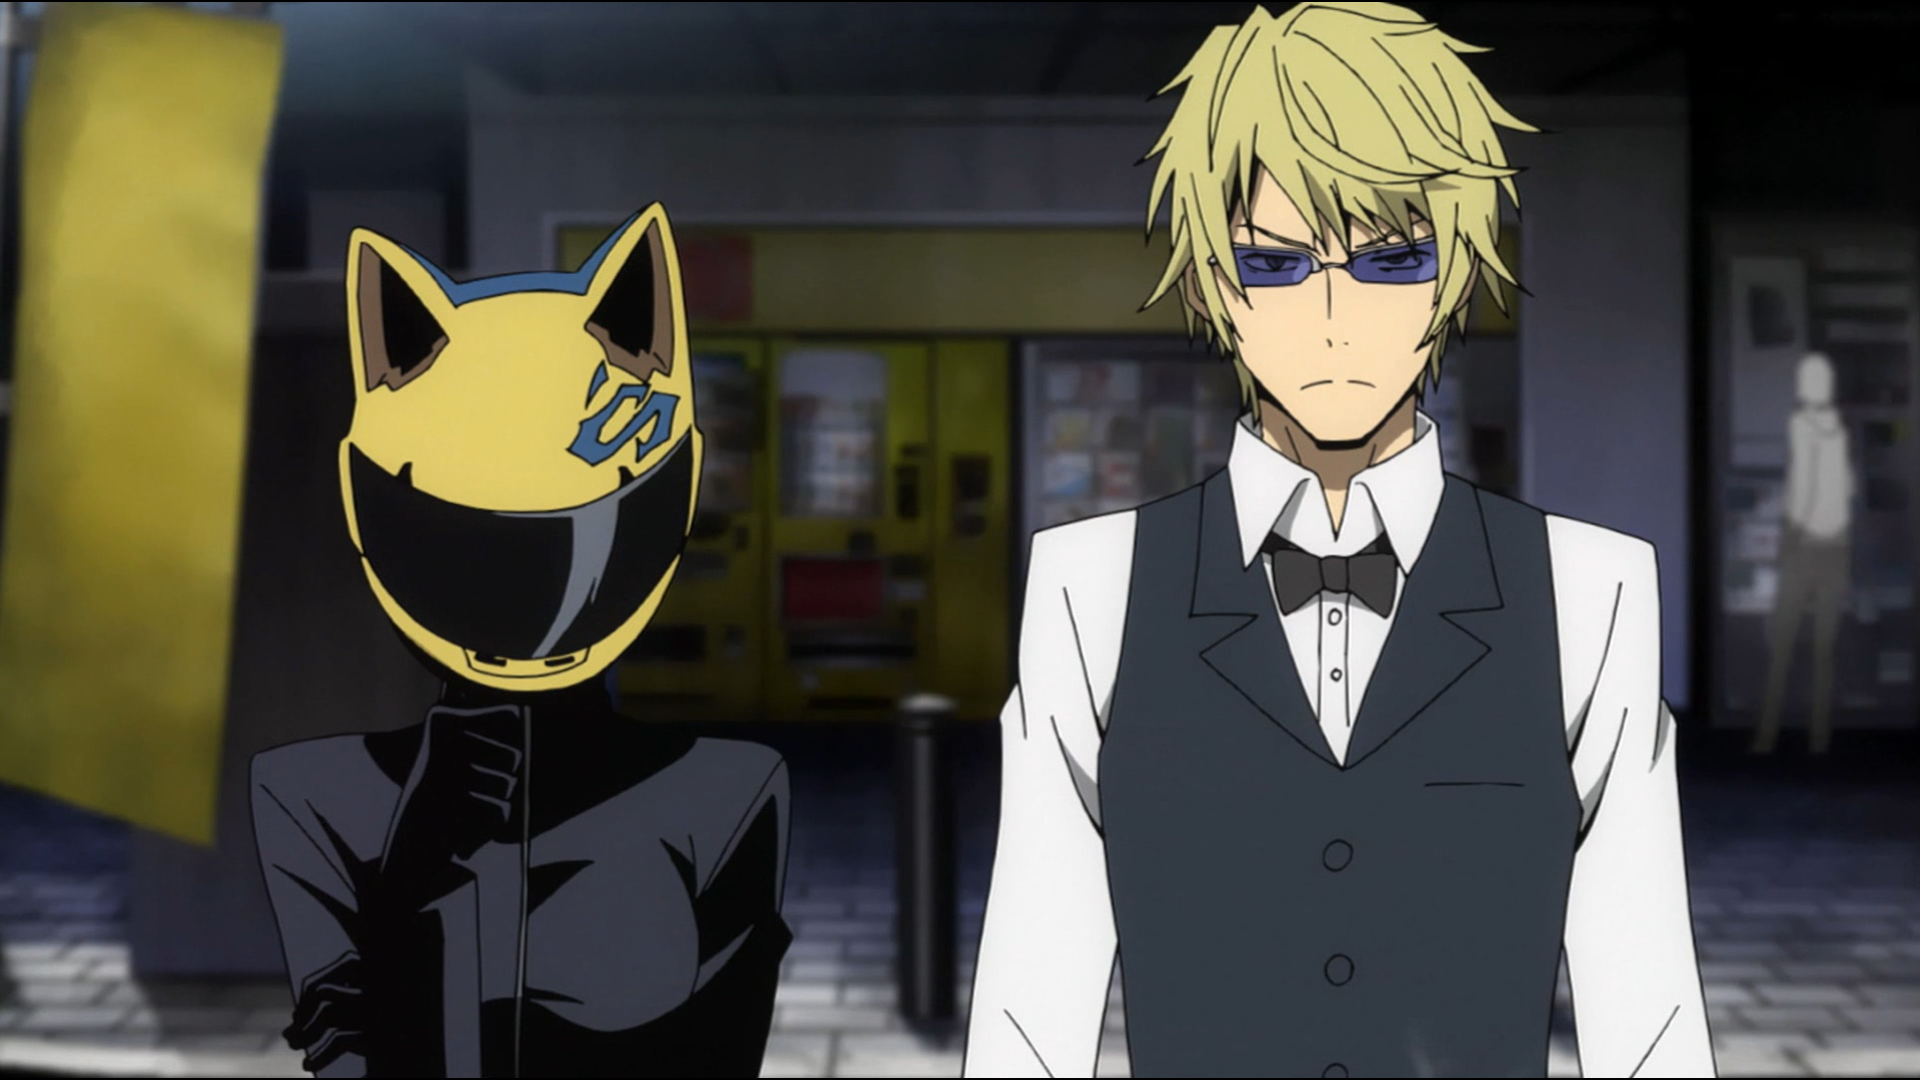 Celty and Shizuo Heiwajima puzzle over a vacant lot in a scene from the Durarara TV Anime.